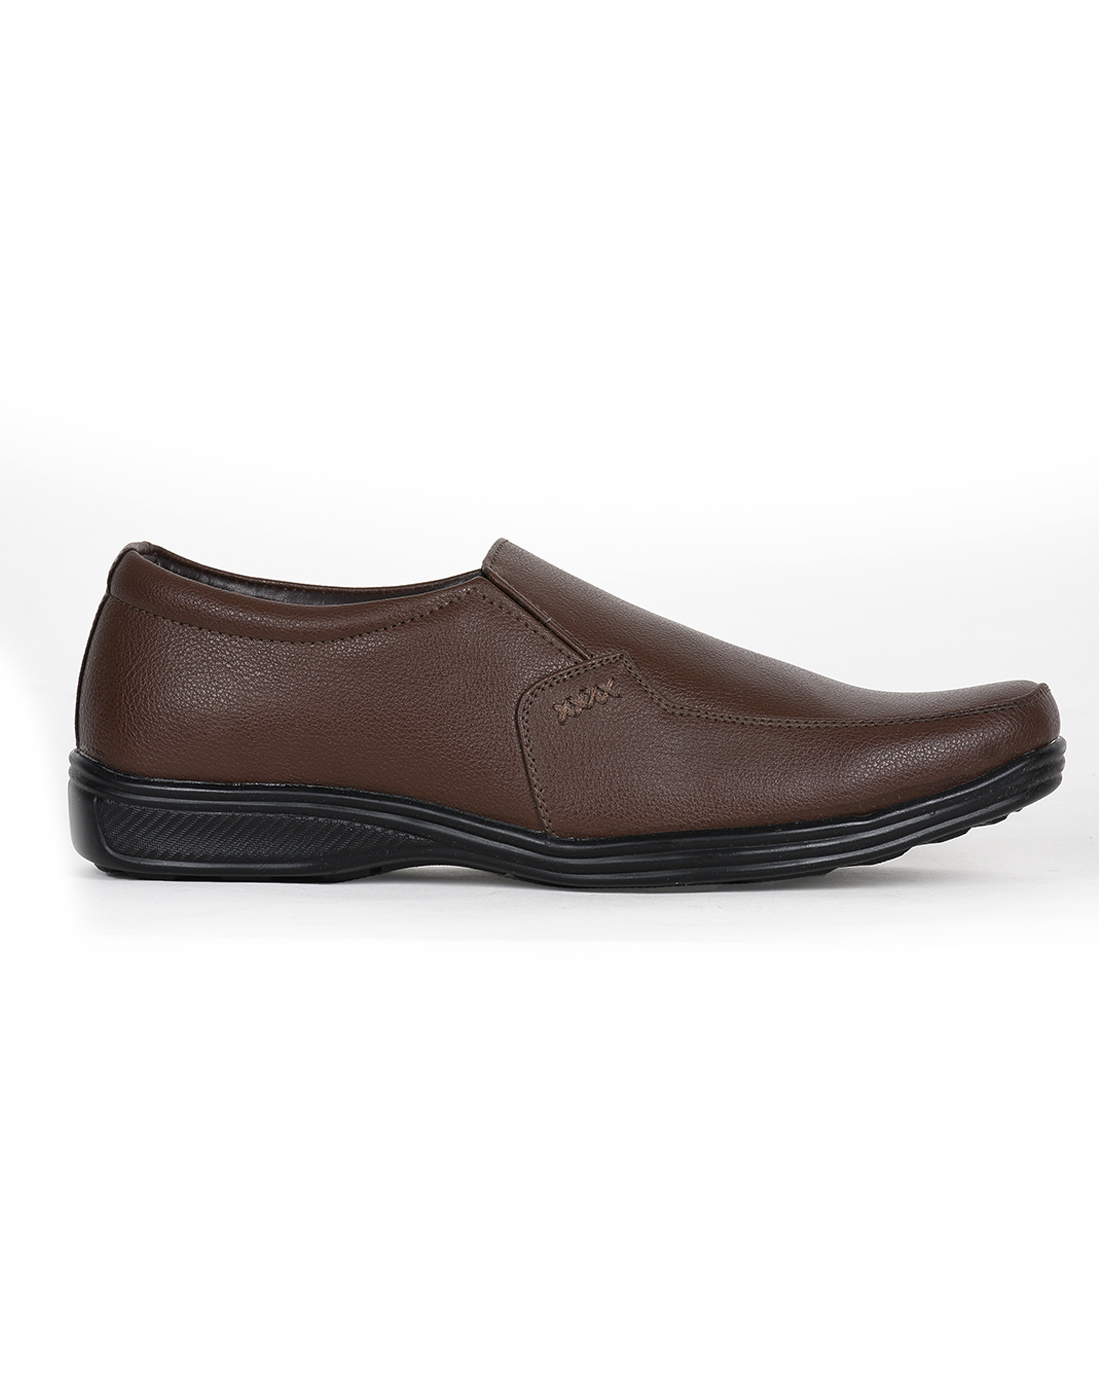 PARAGON Mens Solid Brown Formal Shoes | Stylish, Comfortable and lightweight Slip On Moccasin Shoes for Men | Formal Wear | Party Wear